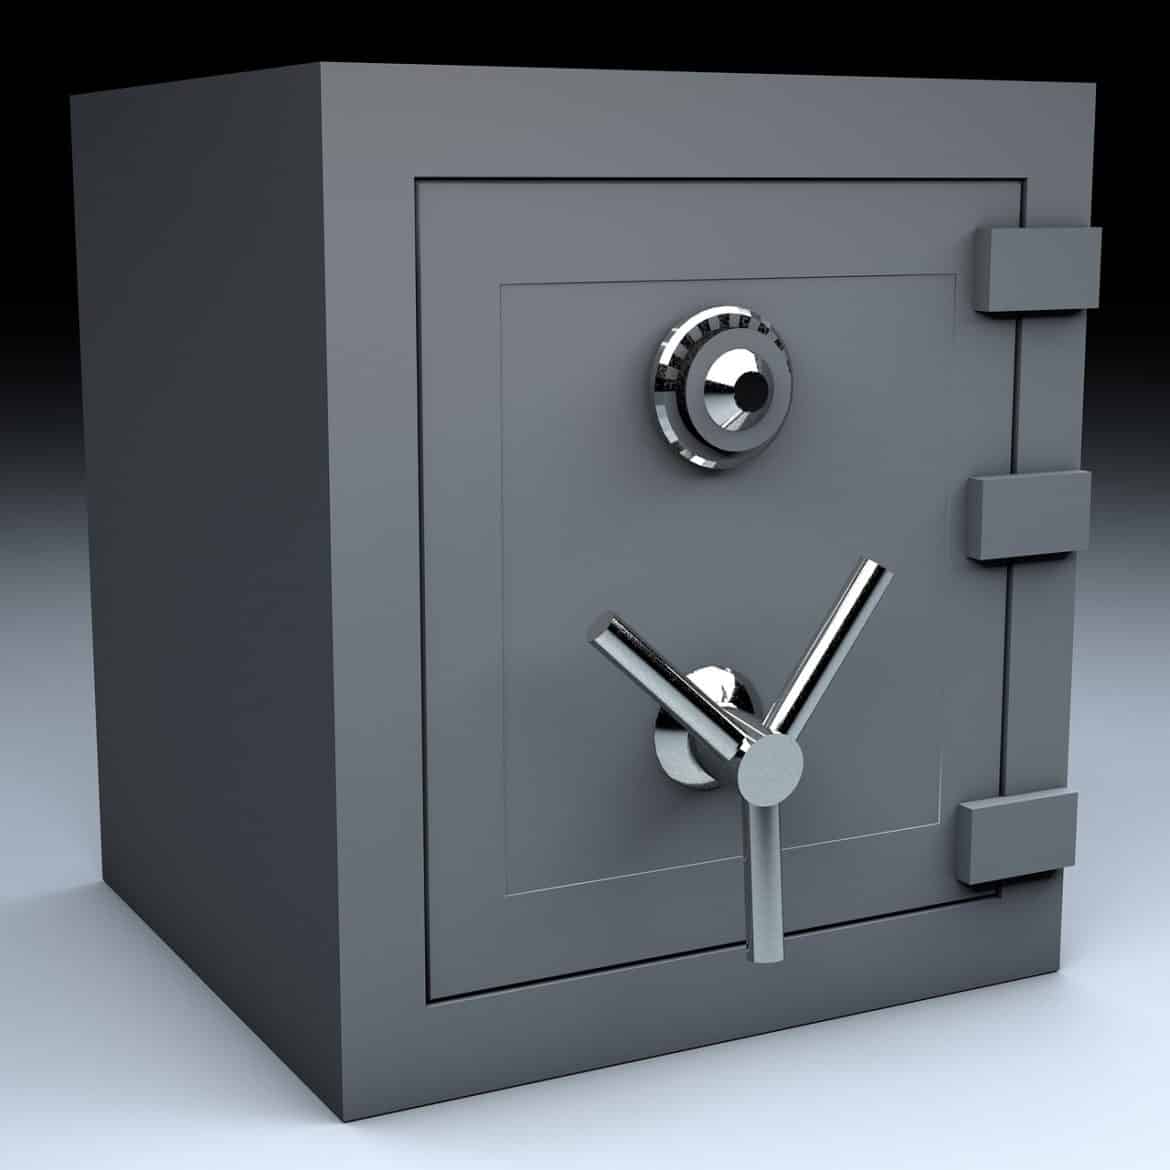 What Is The Best Fireproof Document Safe For Home Use Top Ten Safes